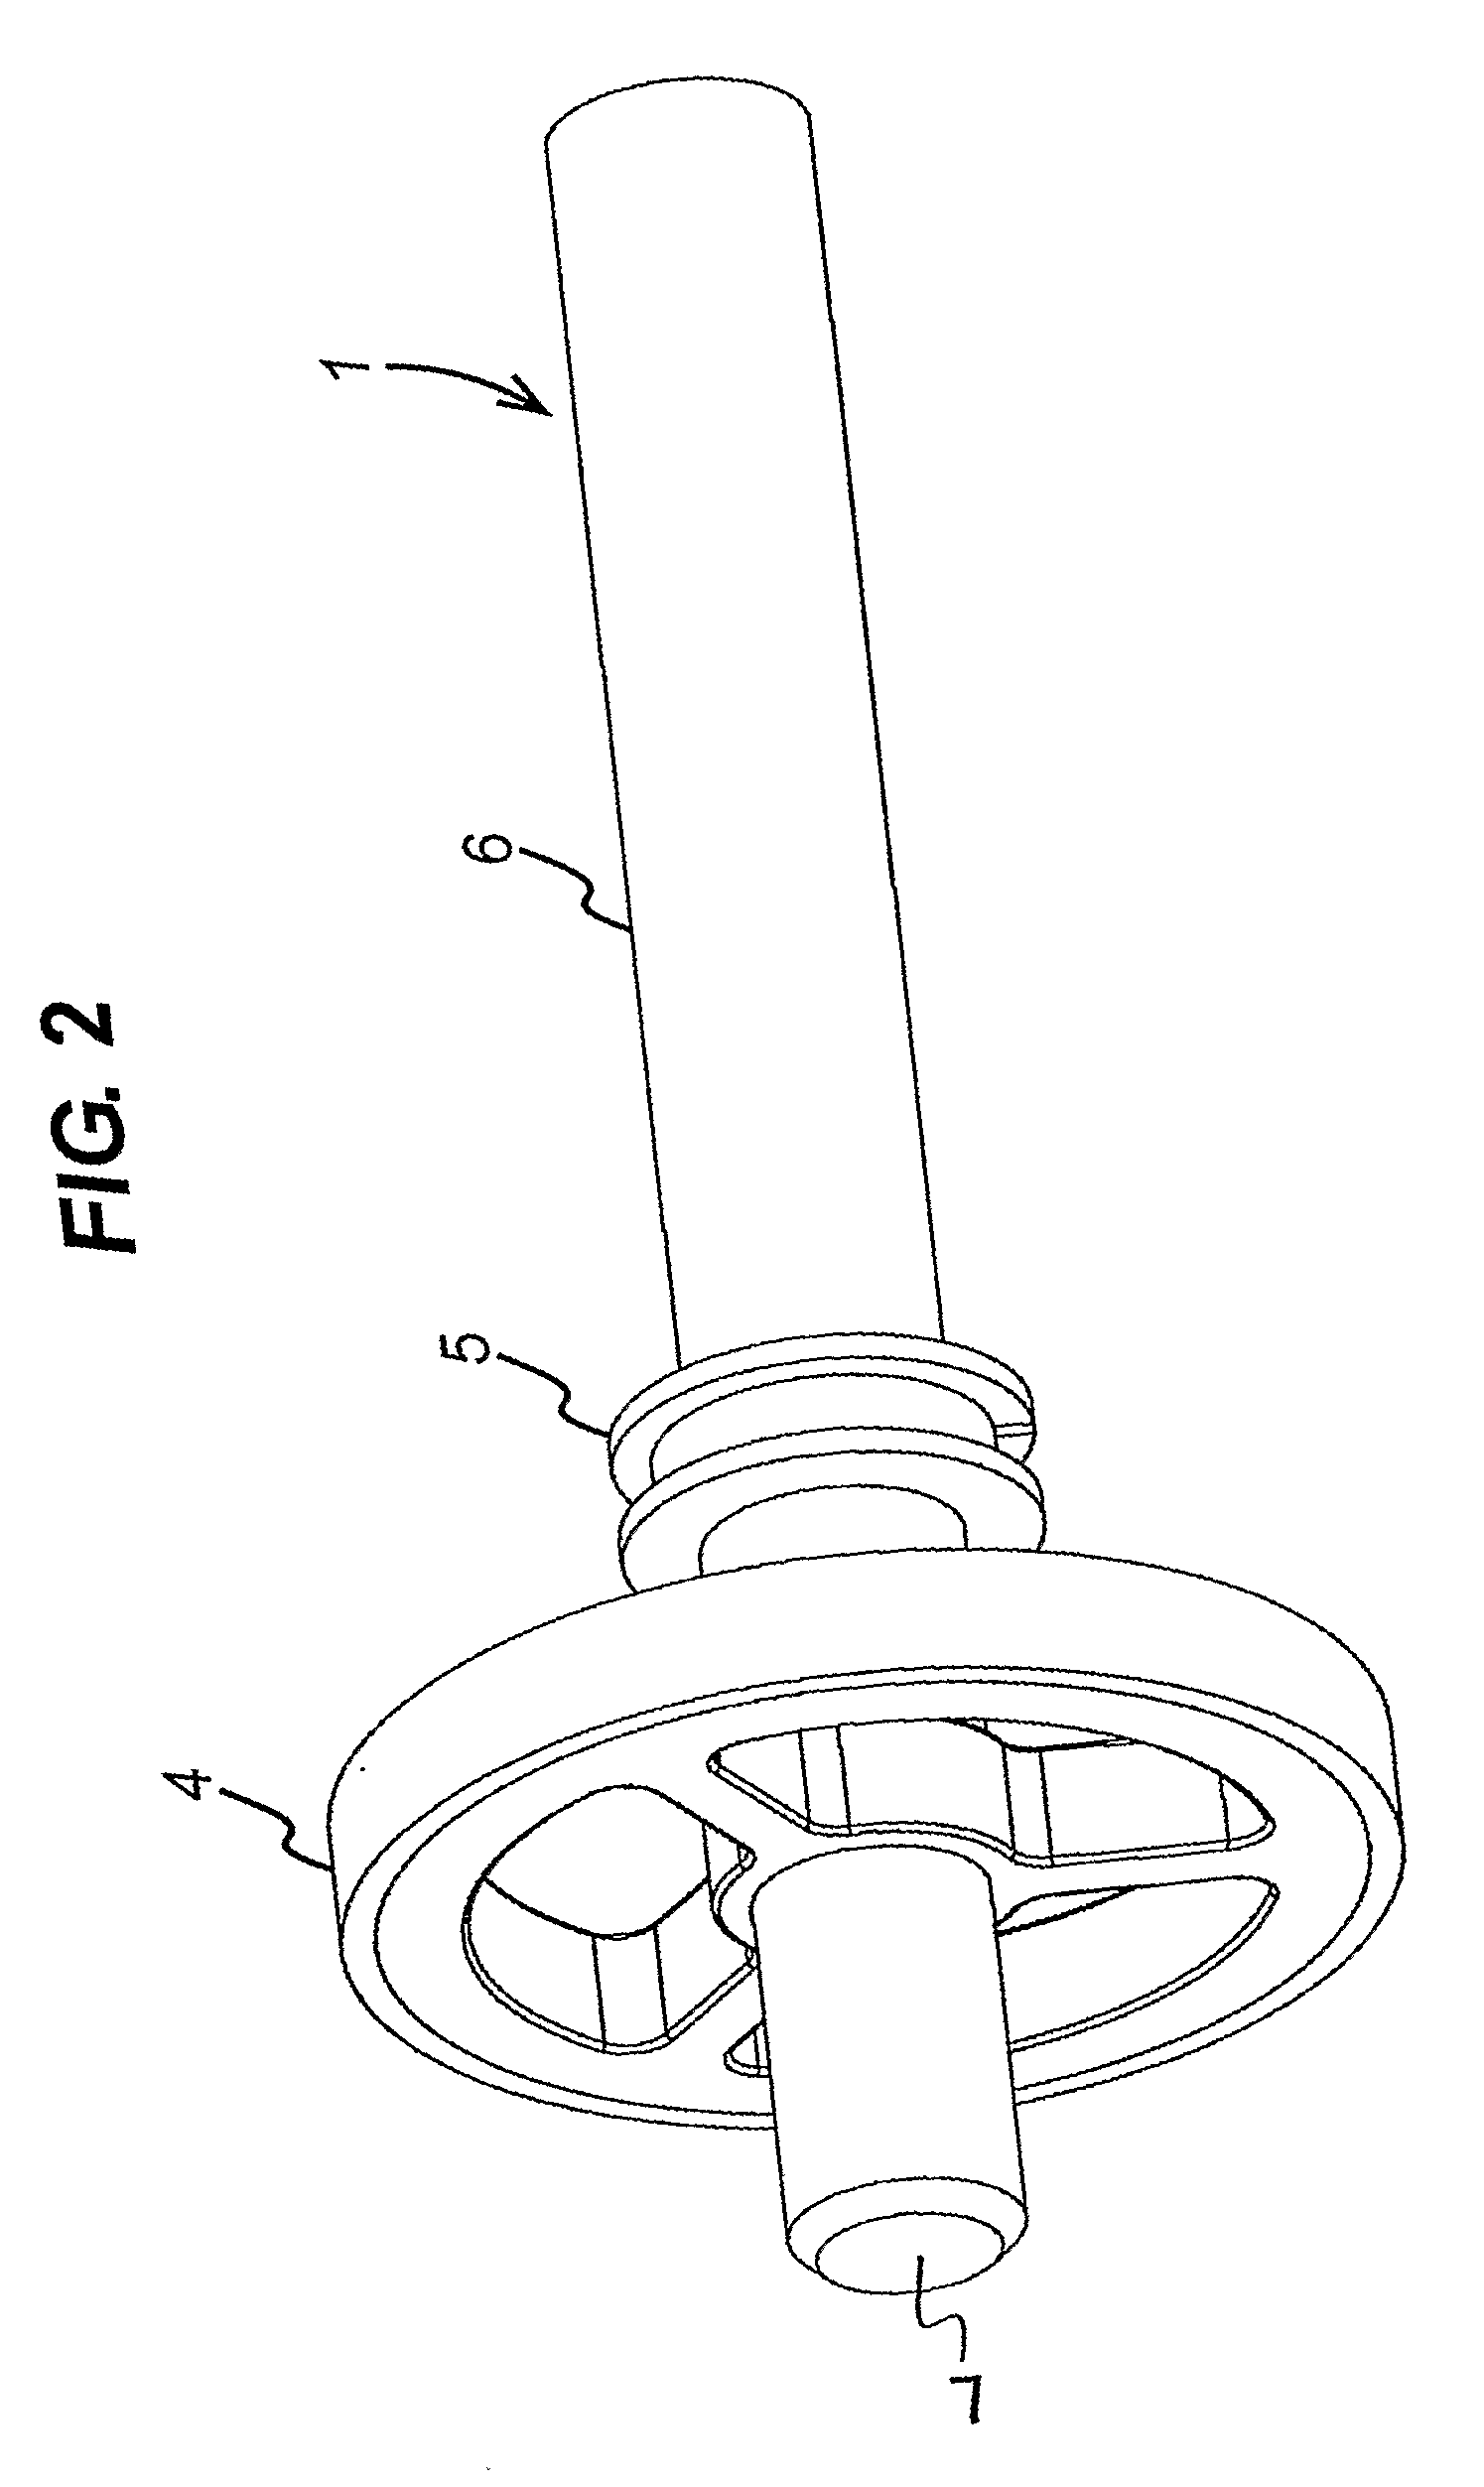 Apparatus and method for determining magnetic properties of materials